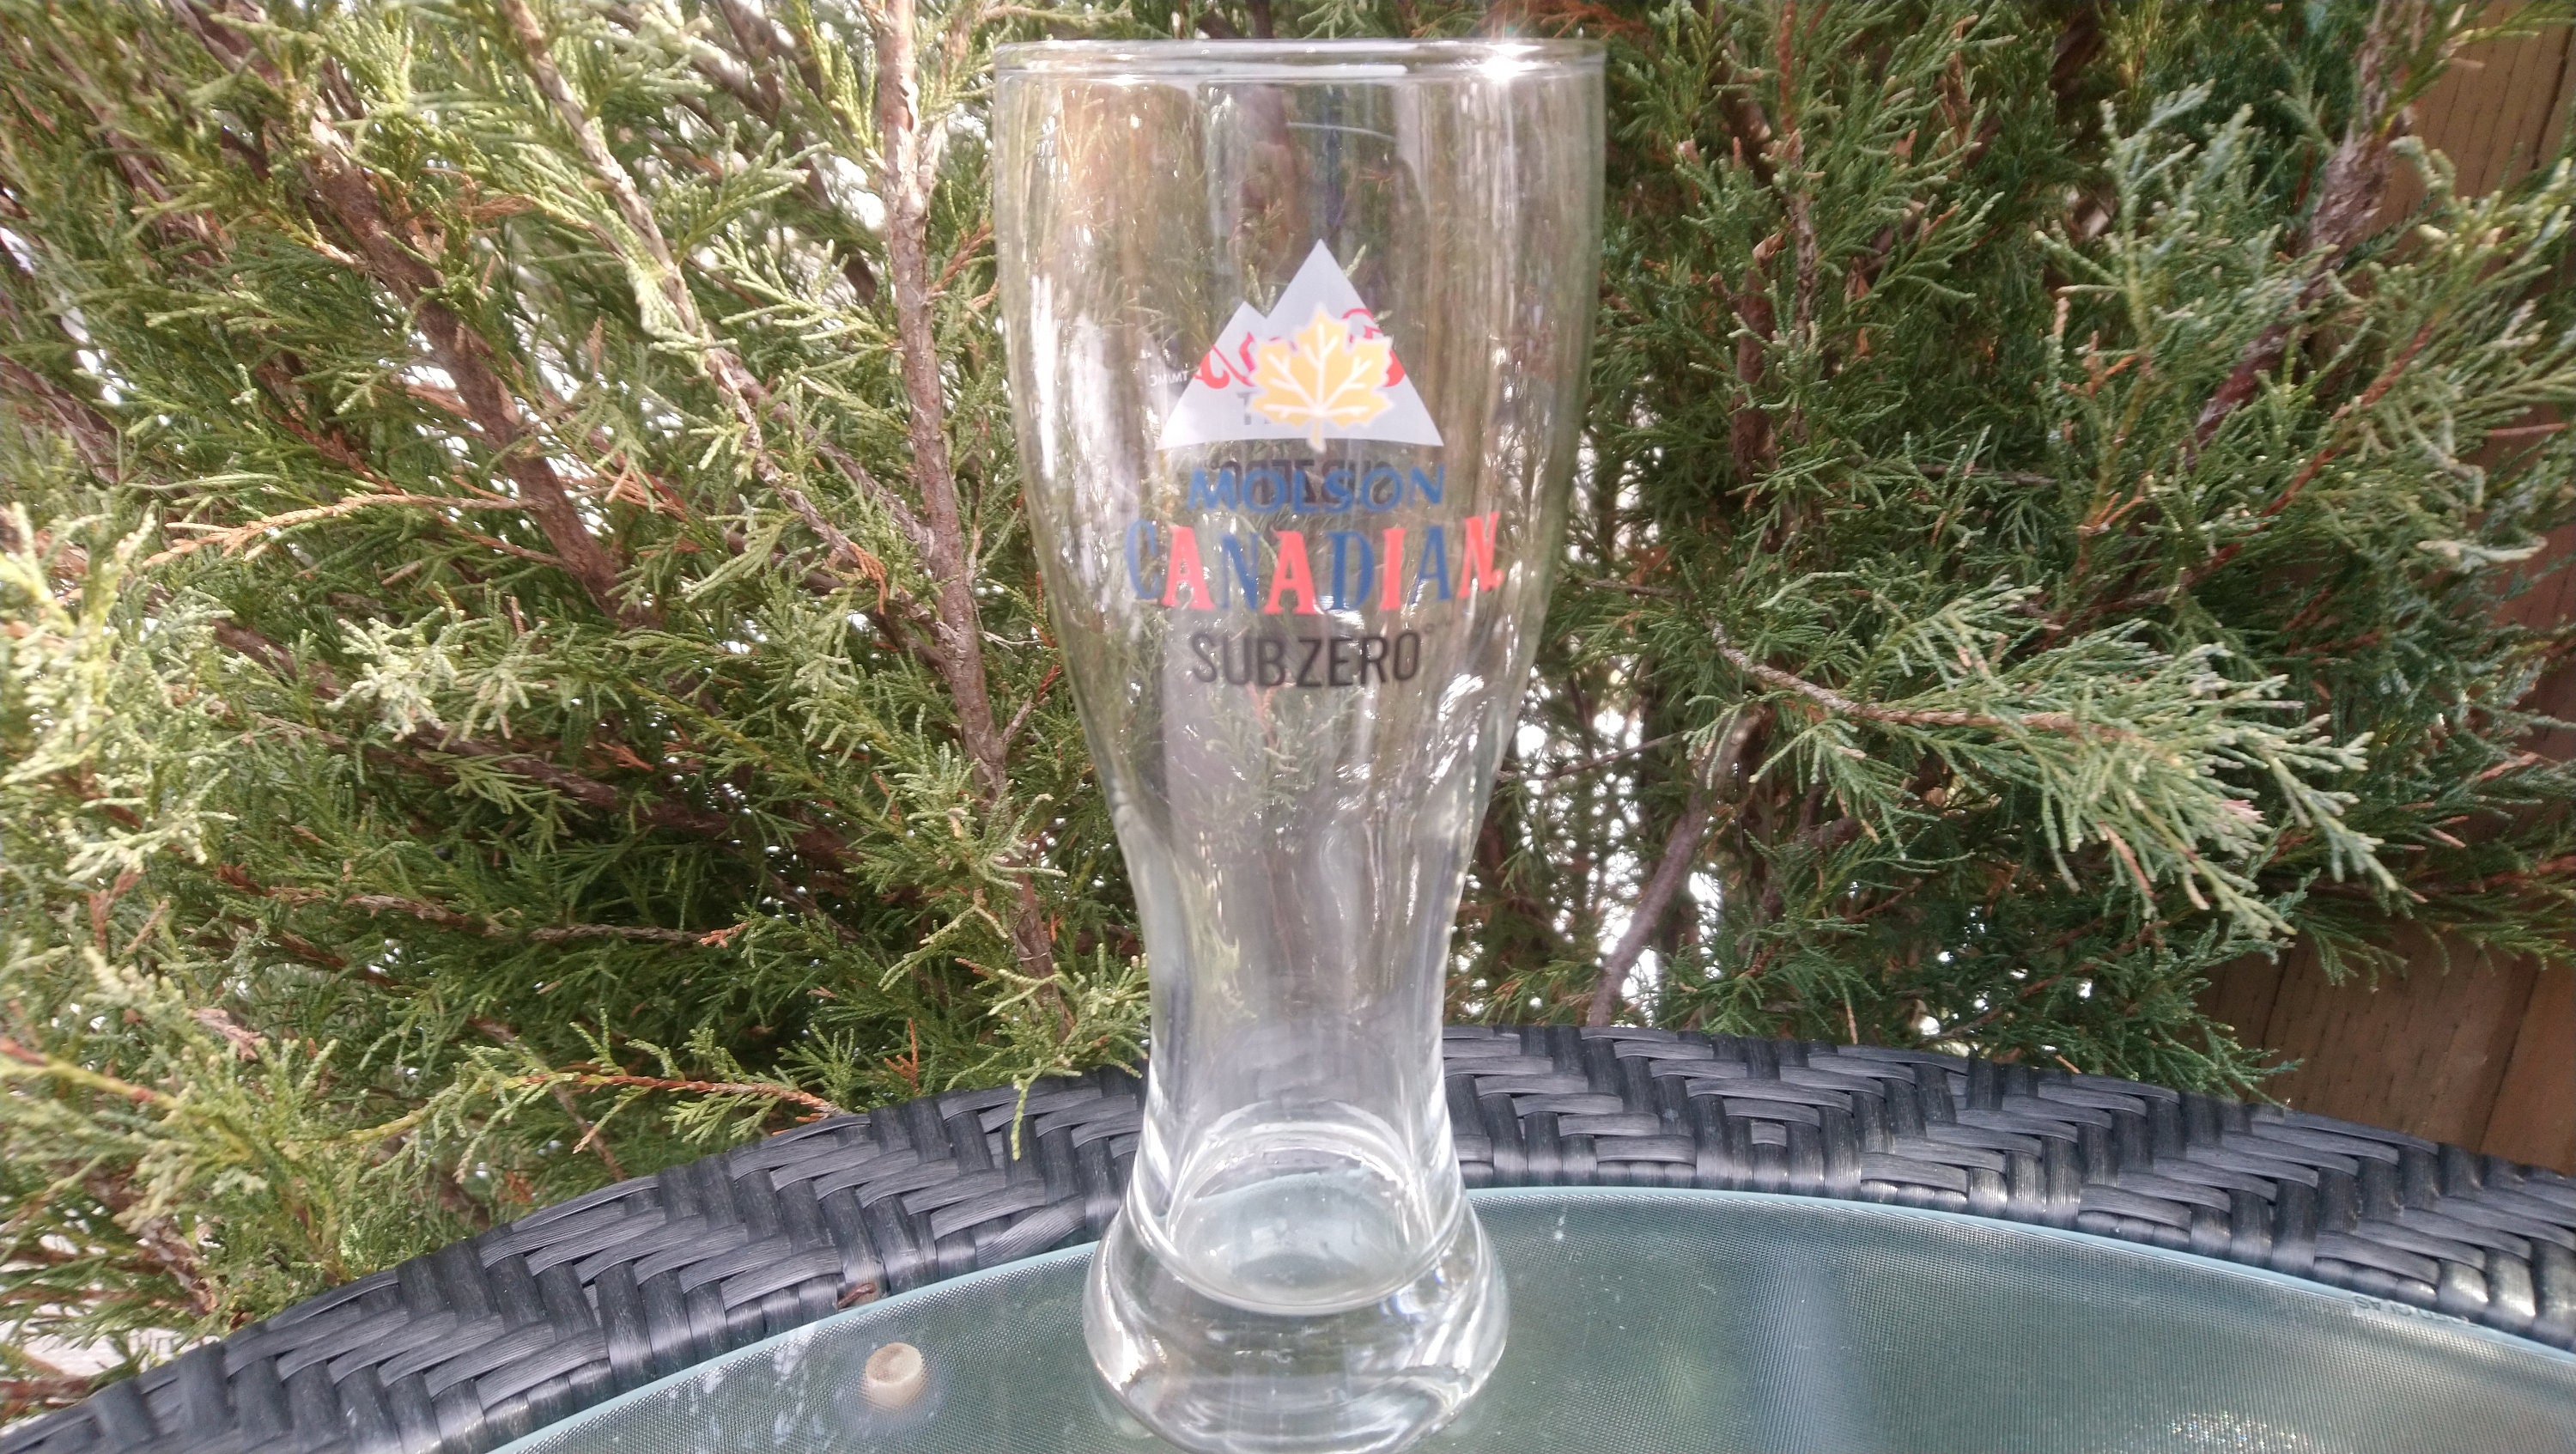 COORS LIGHT BEER GLASS FROSTED c/w LOGO REVEAL SUB ZERO 